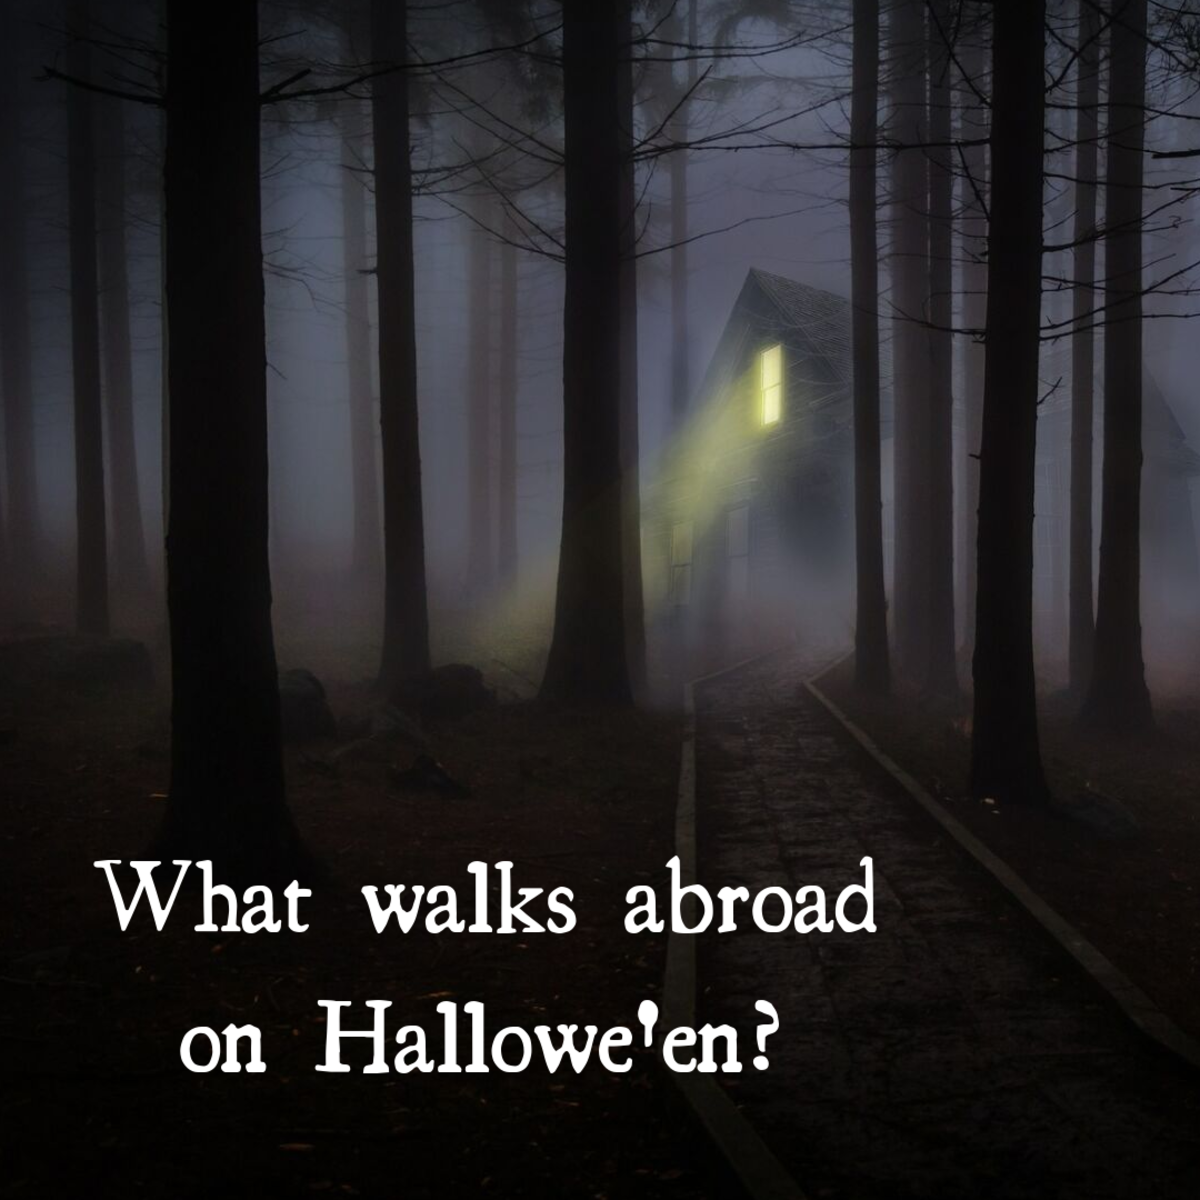 What walks abroad on Hallowe’en? Answer: witches, ghosts, goblins, demons, vampires, the ancestors, the dead (and similar).